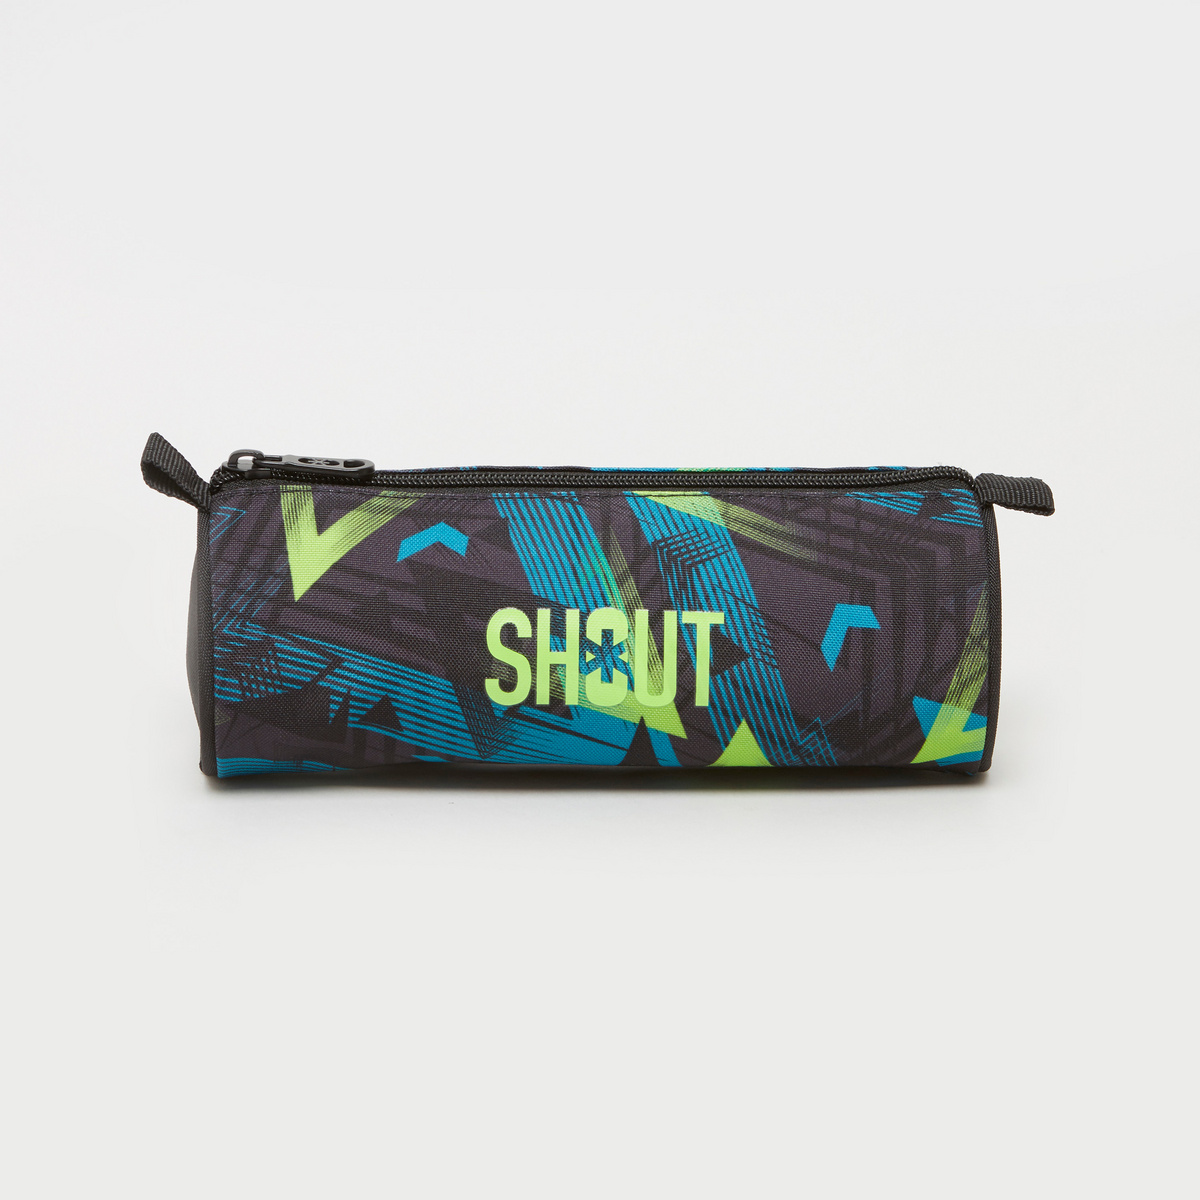 SHOUT TECH Abstract Geo Printed Pencil Case with Zip Closure